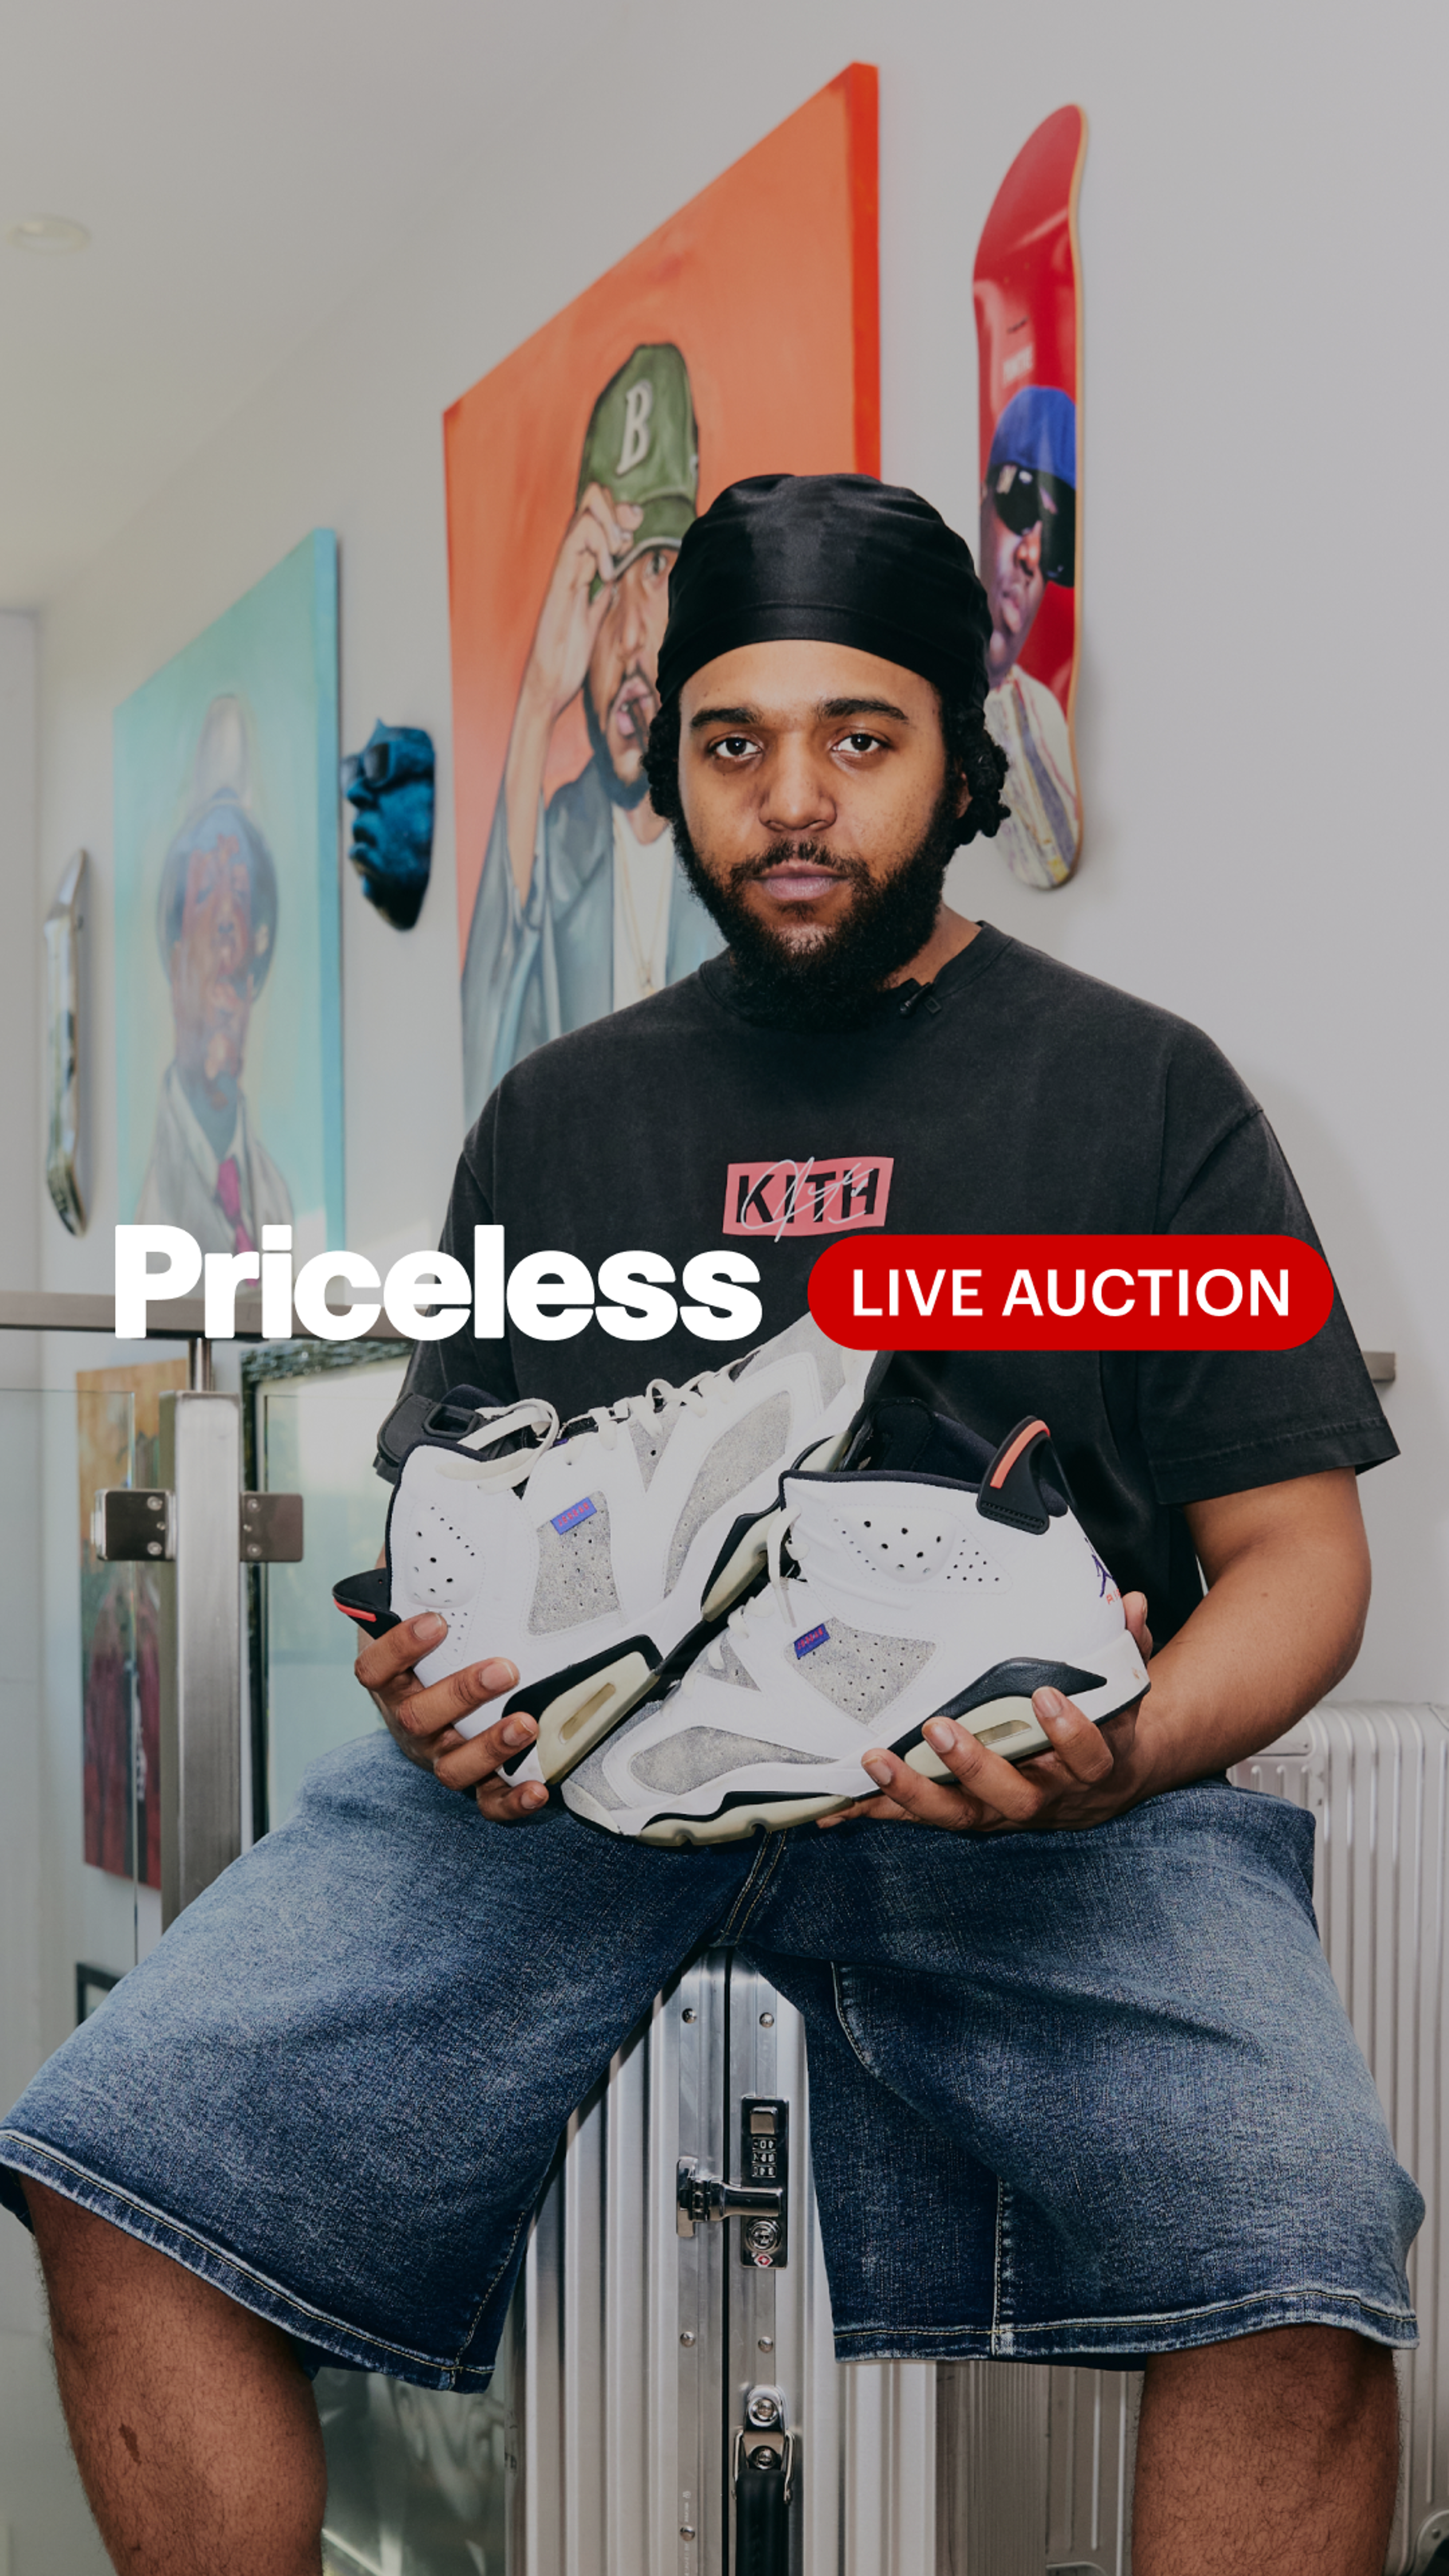 Preview image for the show titled "Priceless with CJ Wallace" at Today @ 10:00 PM